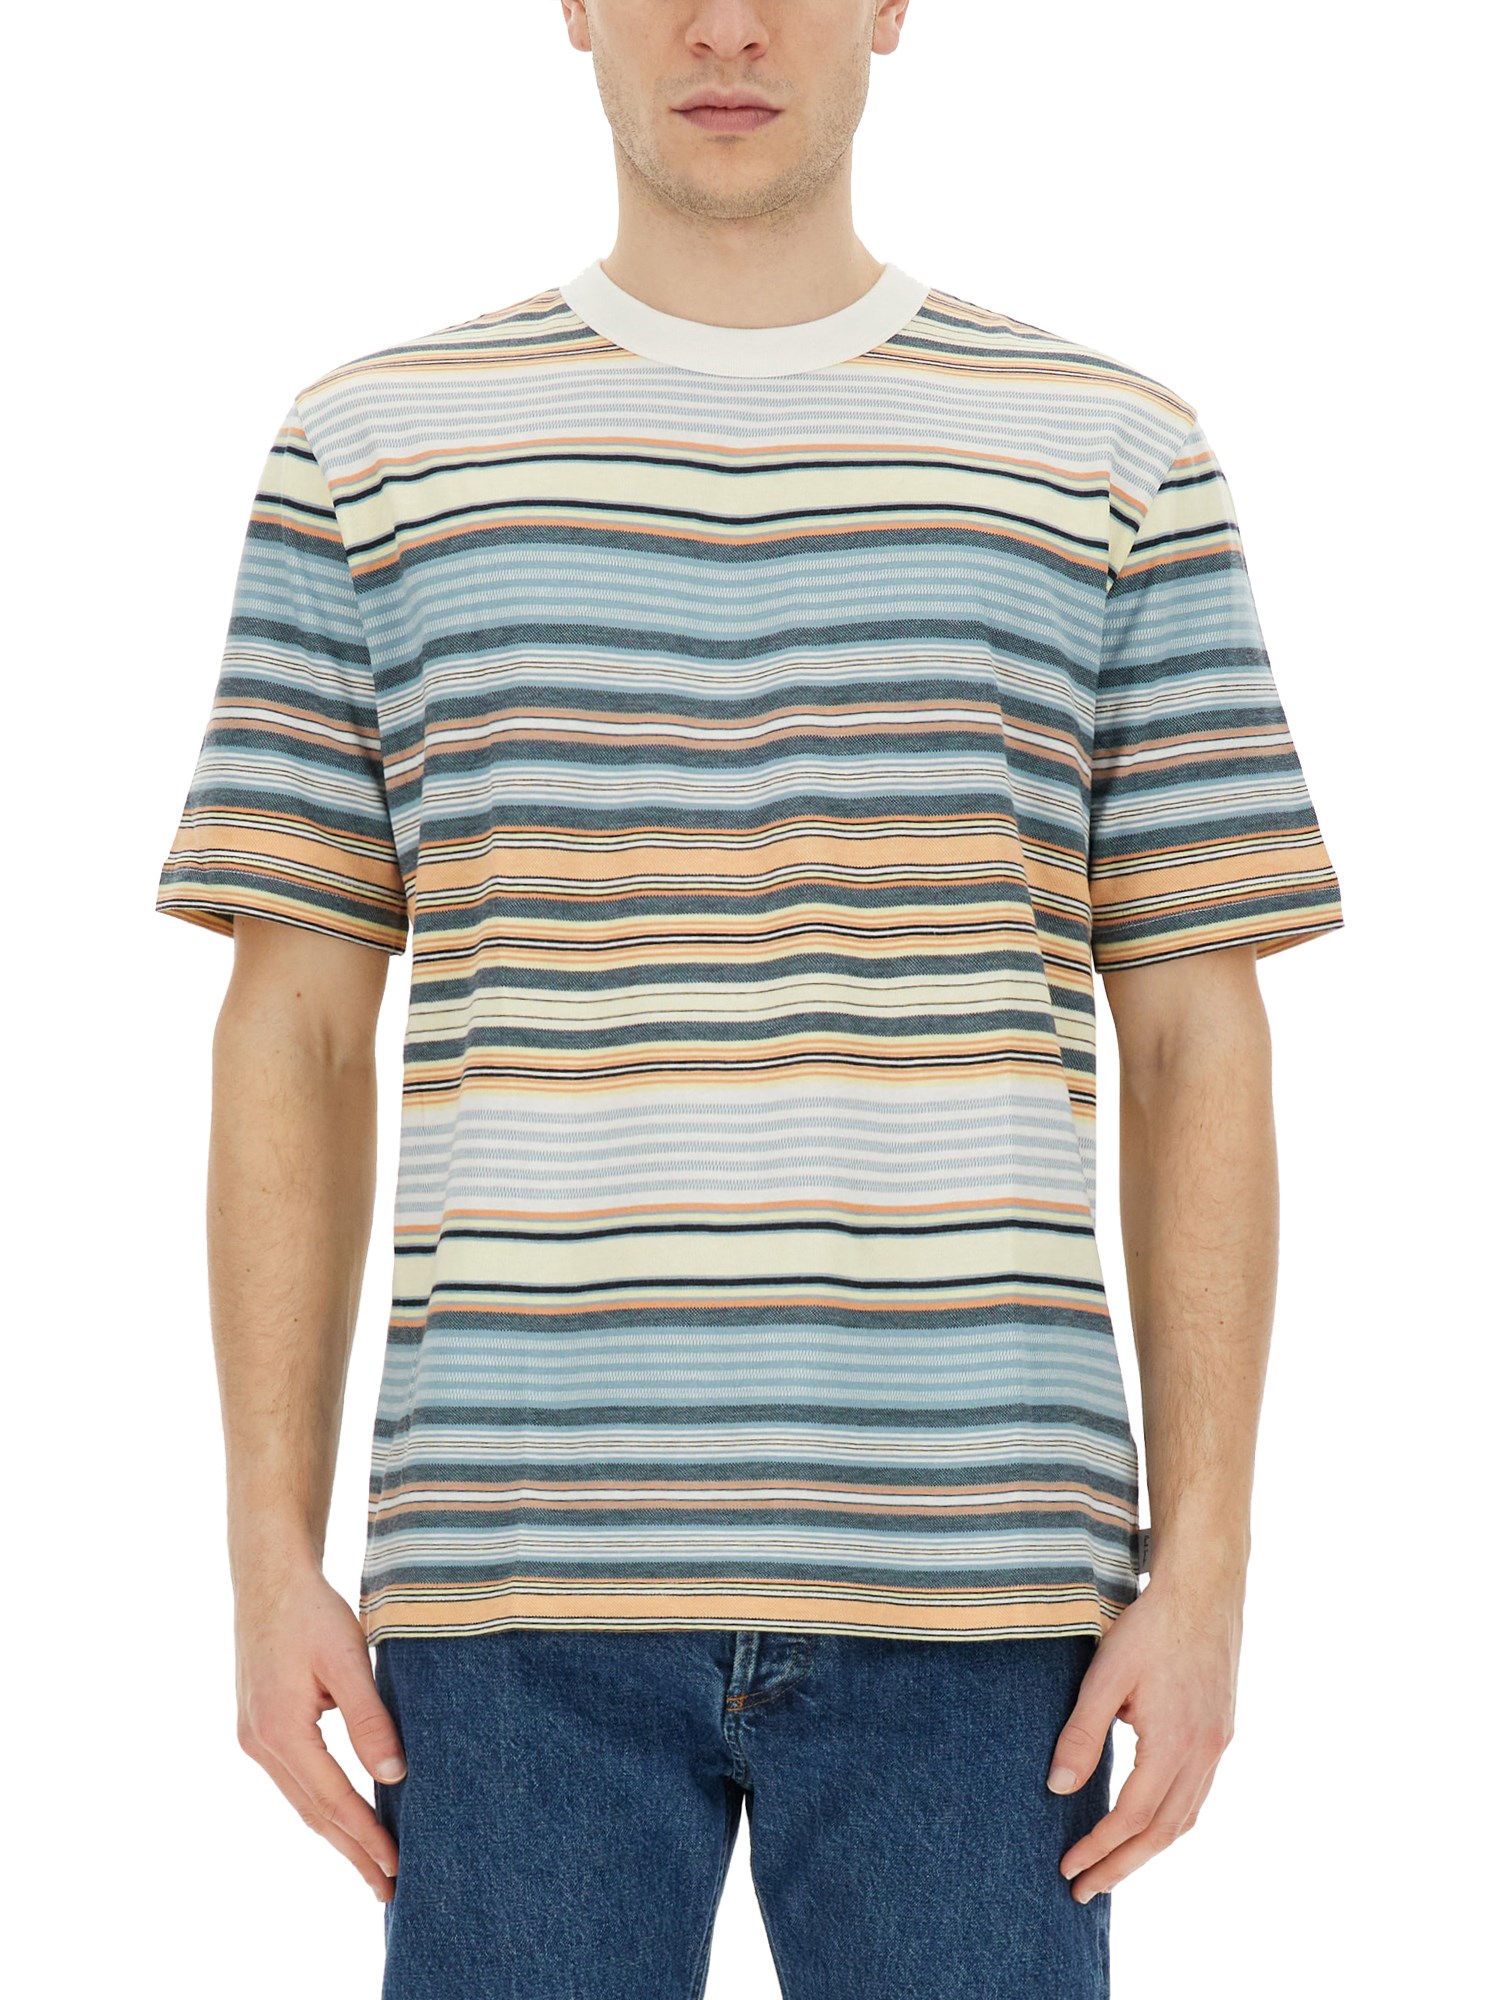 ps by paul smith striped t-shirt